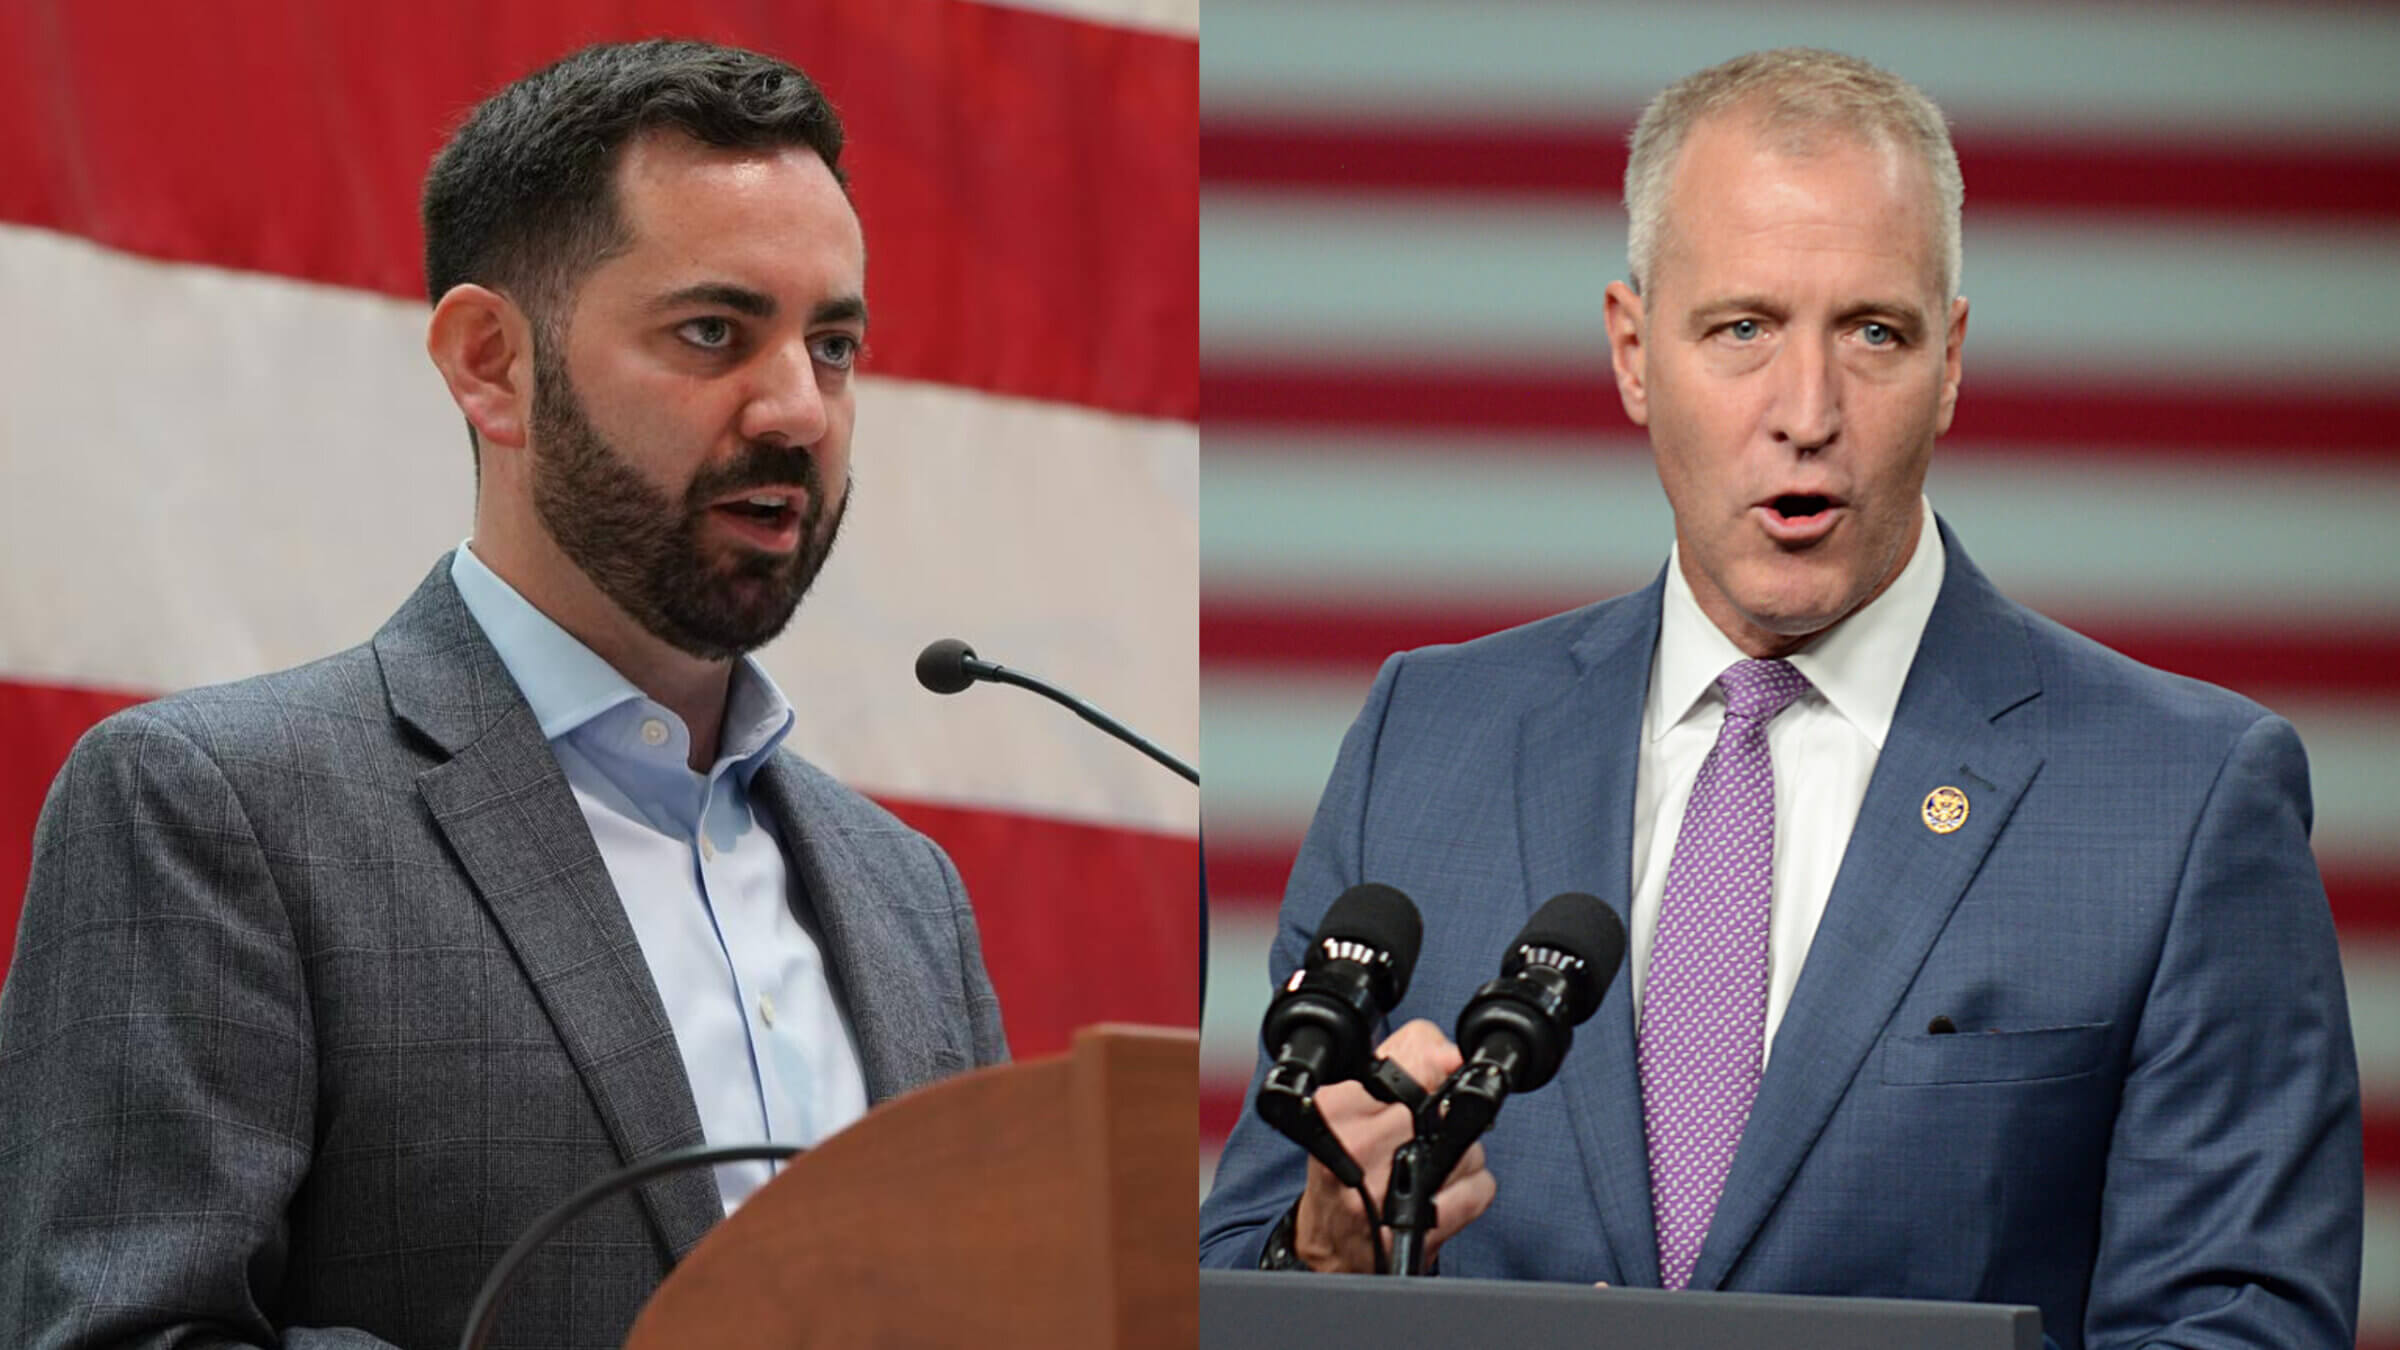 Assemblyman Michael Lawler, left, and Rep. Sean Patrick Maloney are competing to represent New York's 17th Congressional District in the Nov. 8 elections.